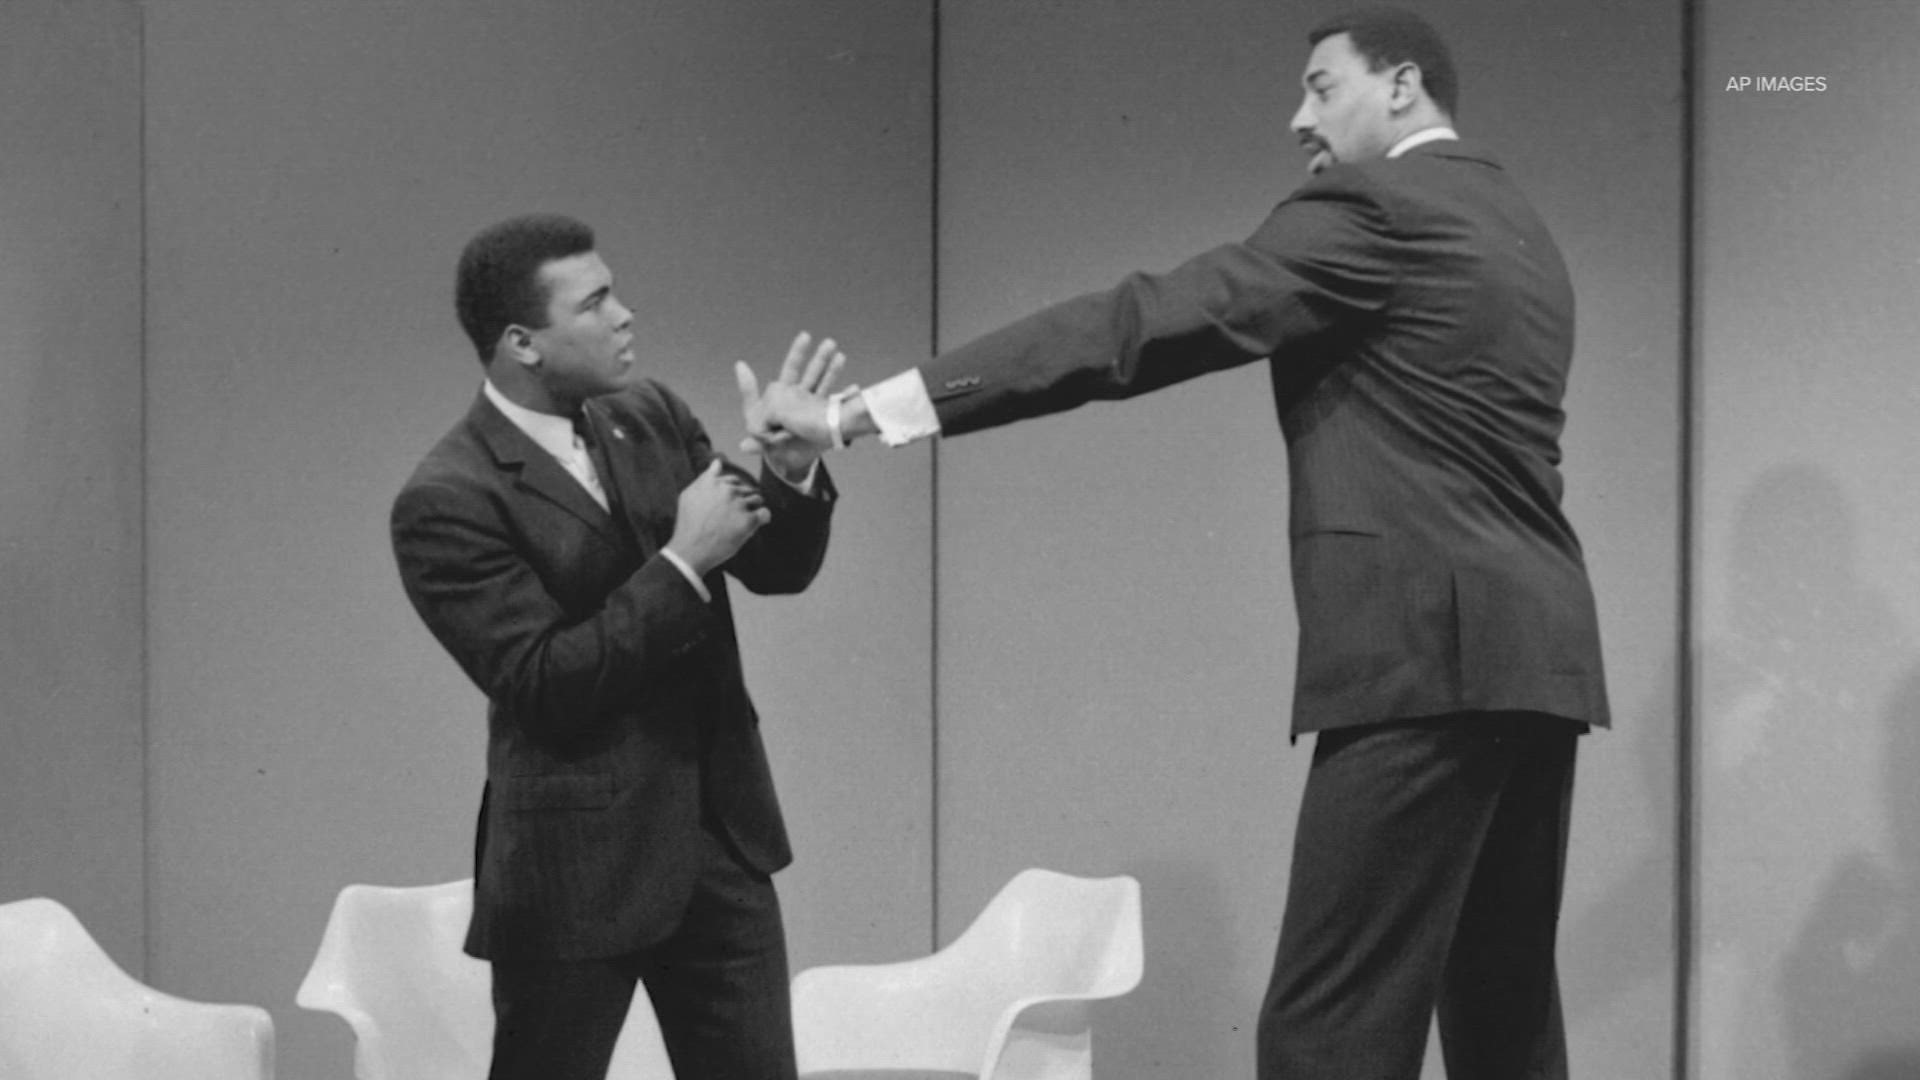 Here's the Strange but True Houston Sports Story about how Muhammad Ali almost fought Wilt Chamberlain in the Astrodome.